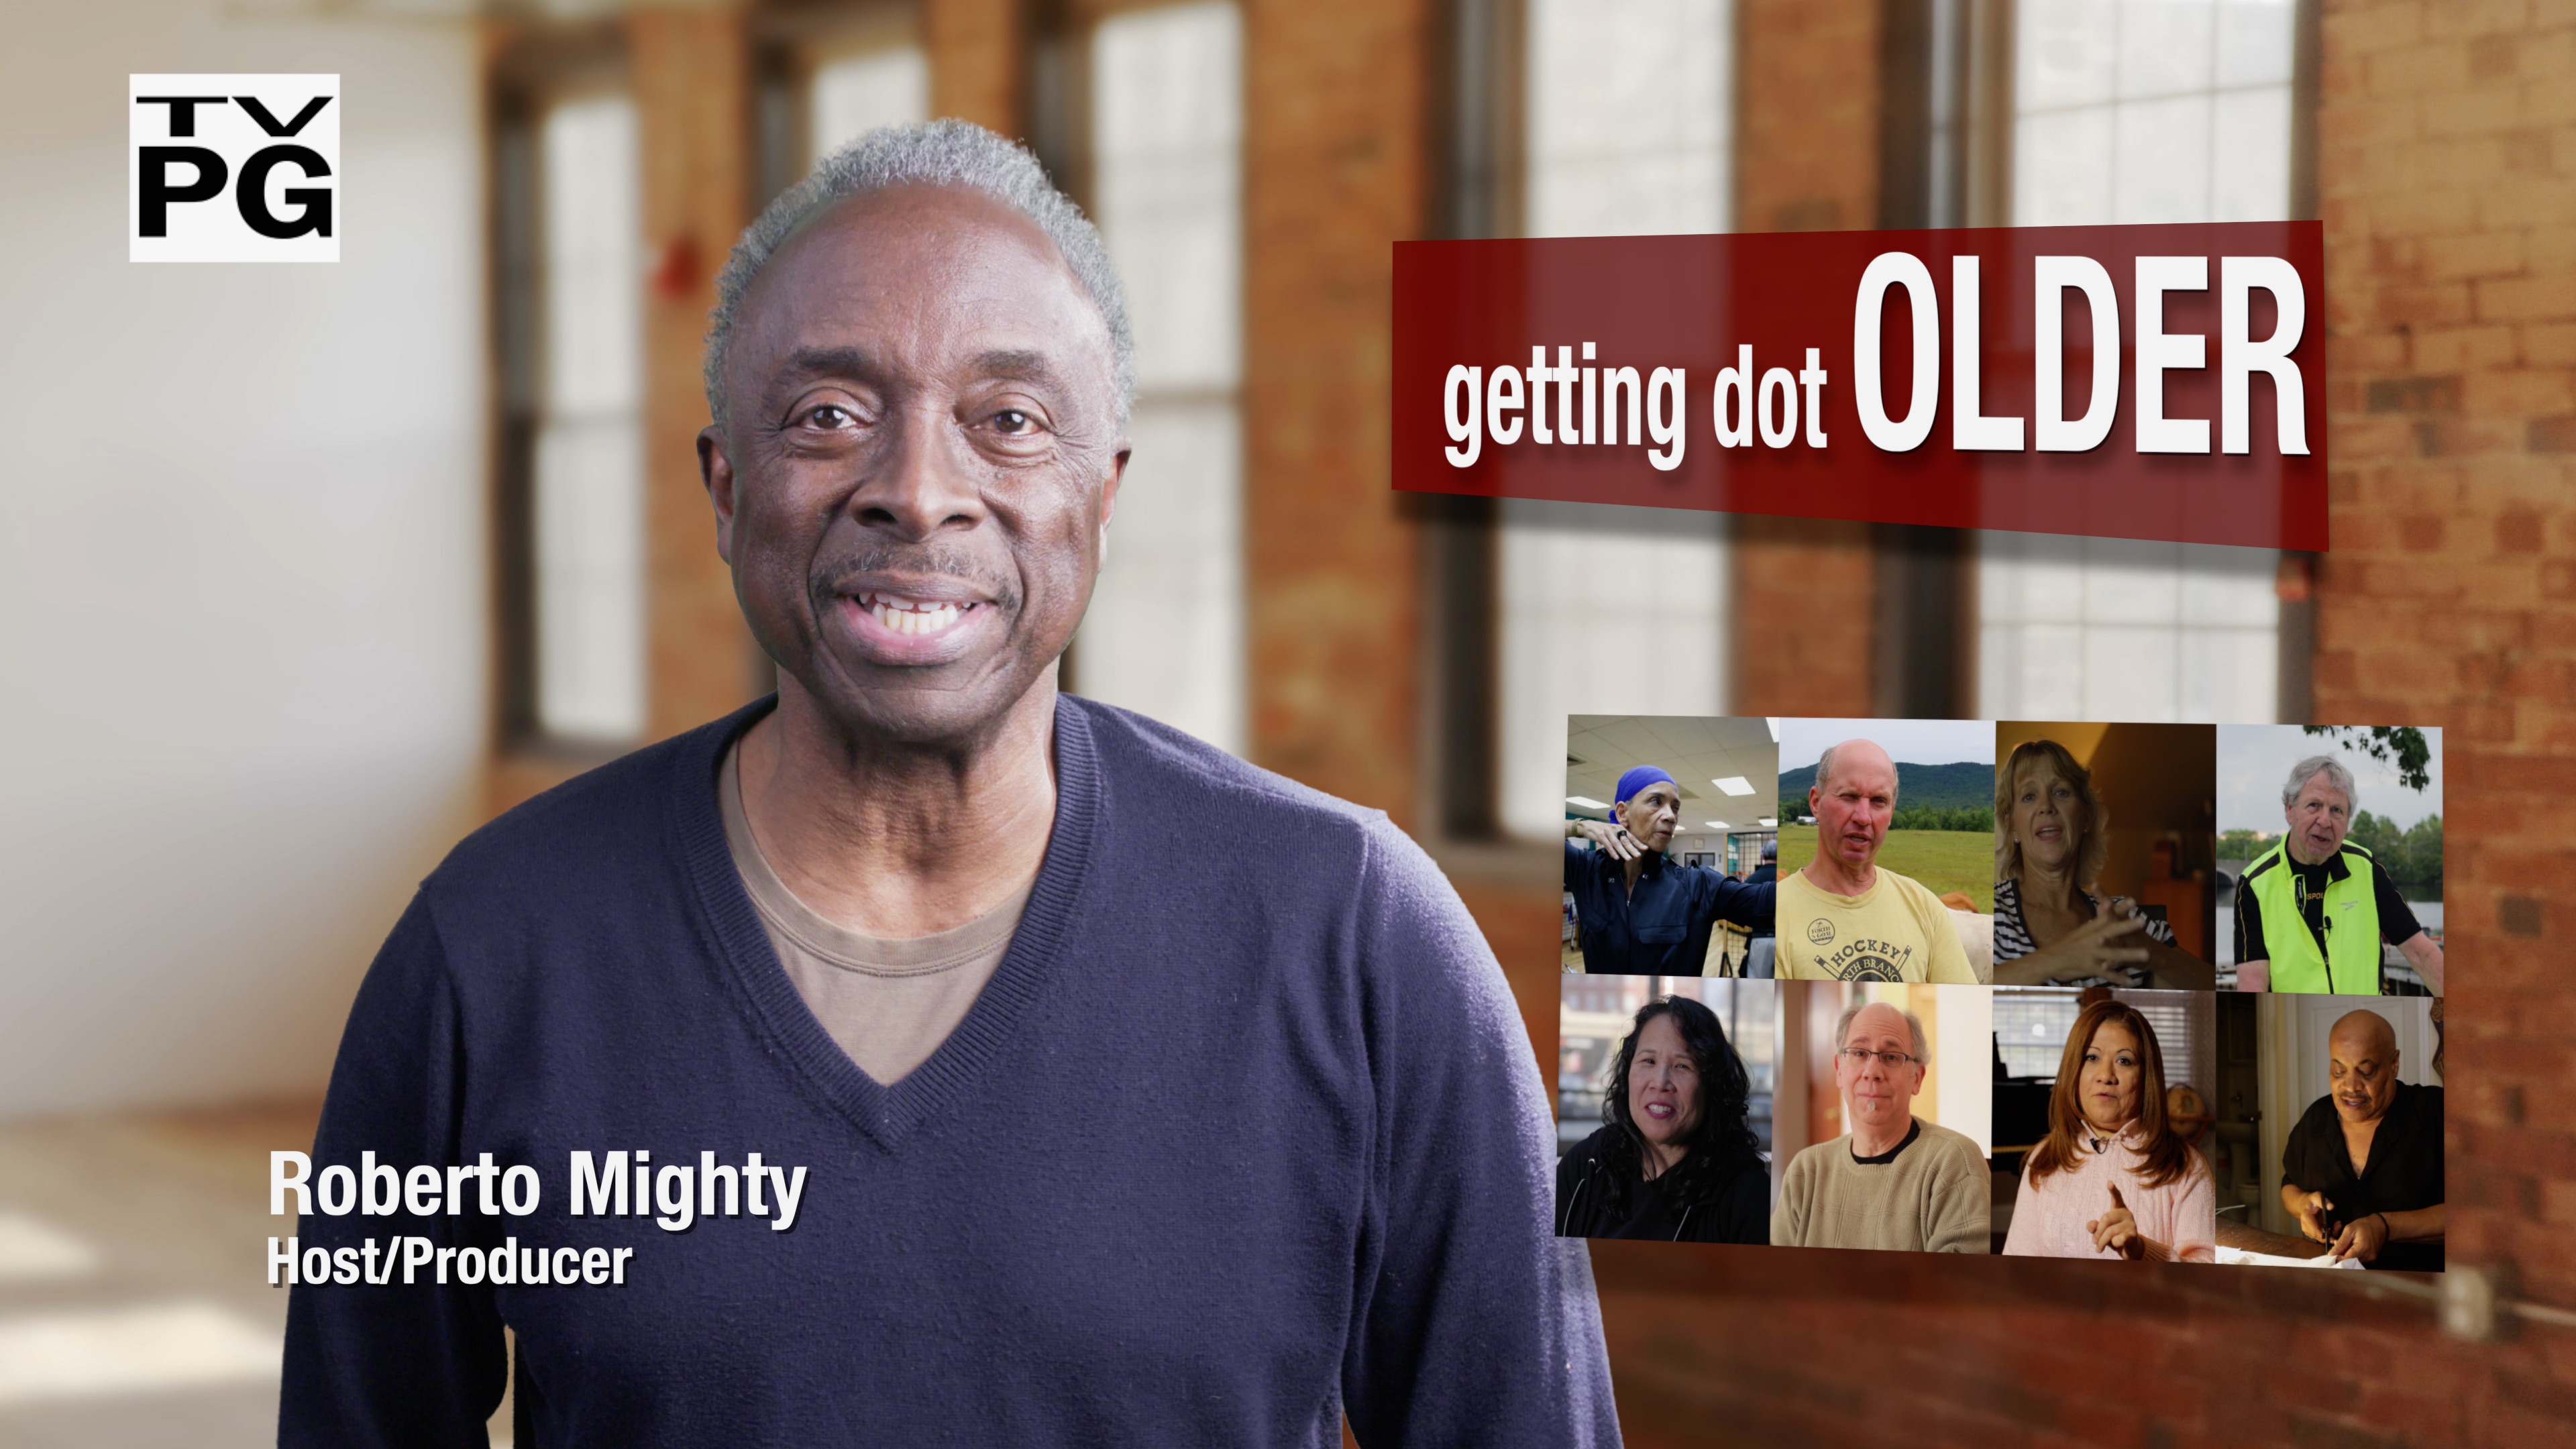 "getting dot OLDER", new public television series Host/Producer, Roberto Mighty